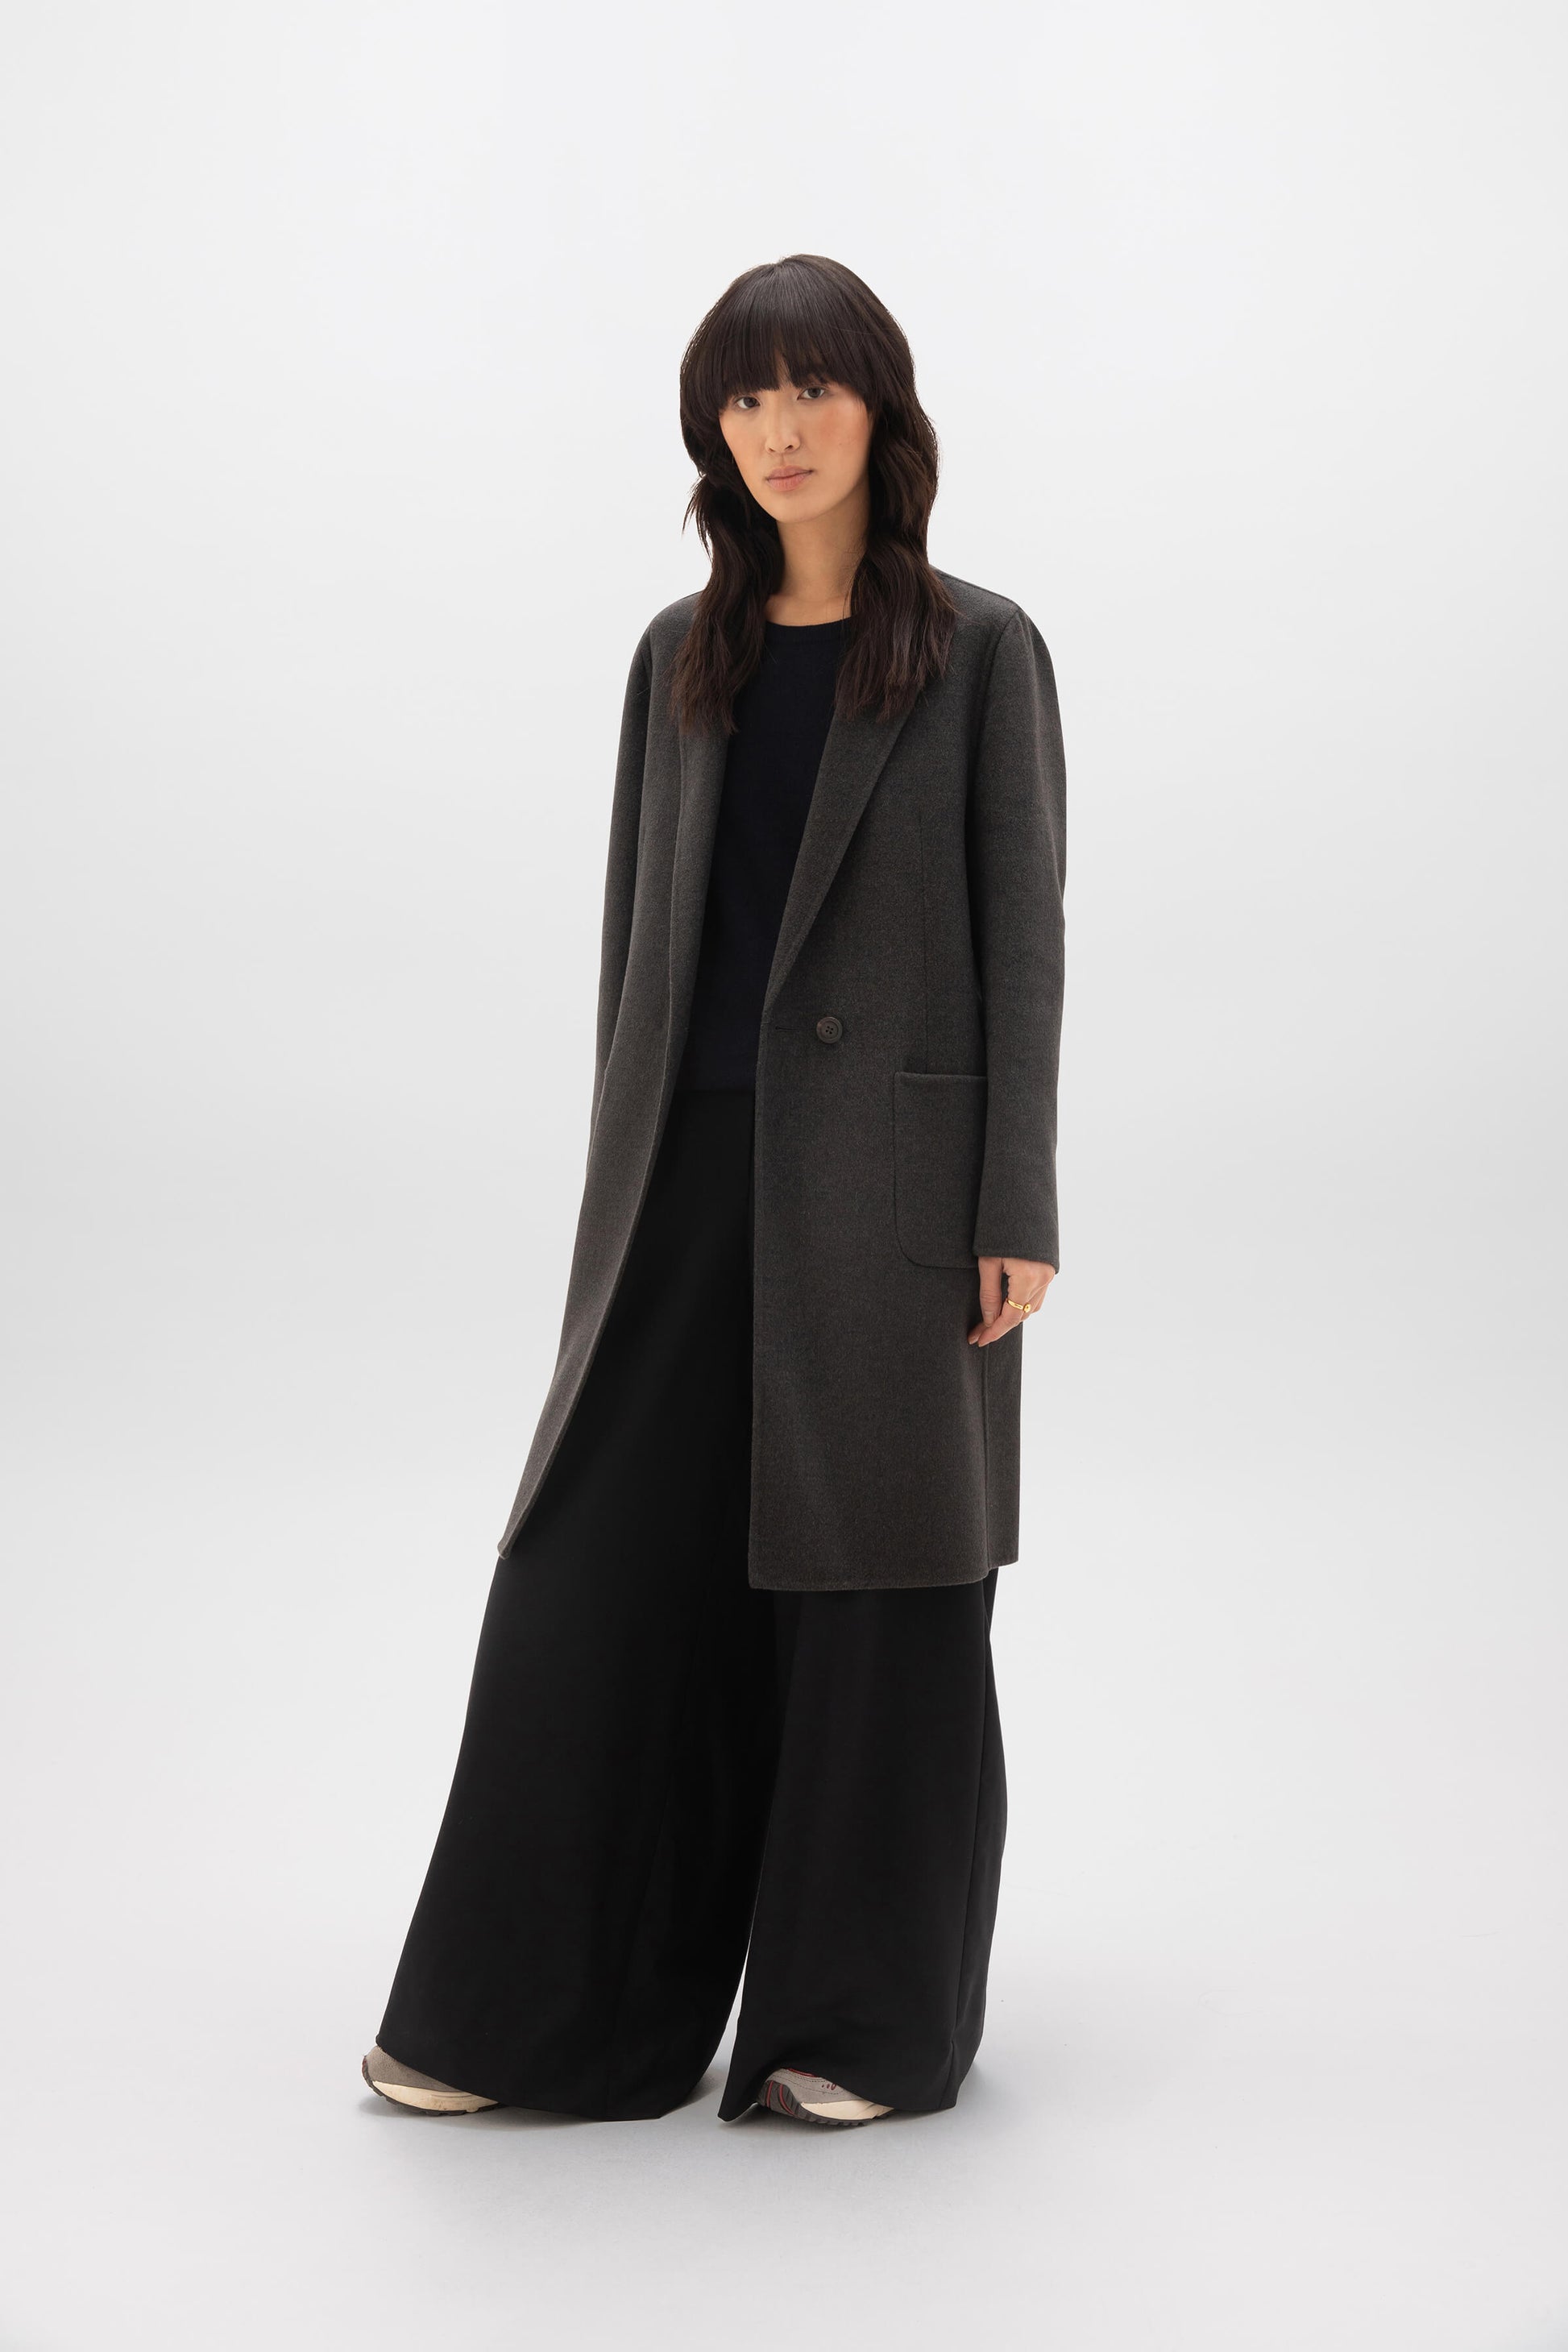 Women's Classic Cashmere Coat in Charcoal Grey – Johnstons of Elgin